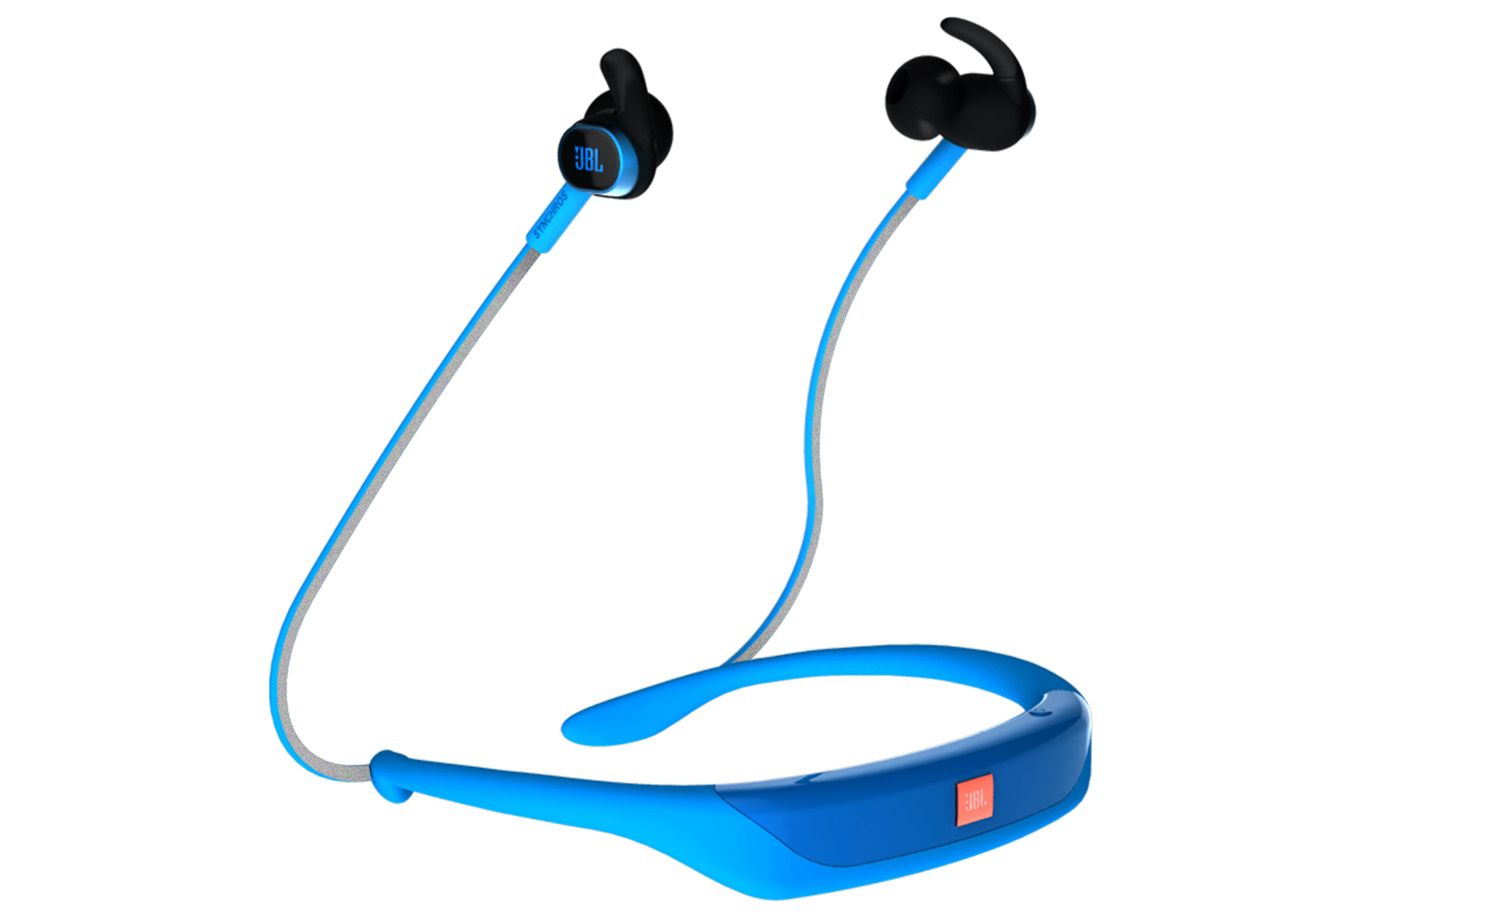 jbl reflect response earbuds have gesture control so you can wave in the air like you just don’t care image 1